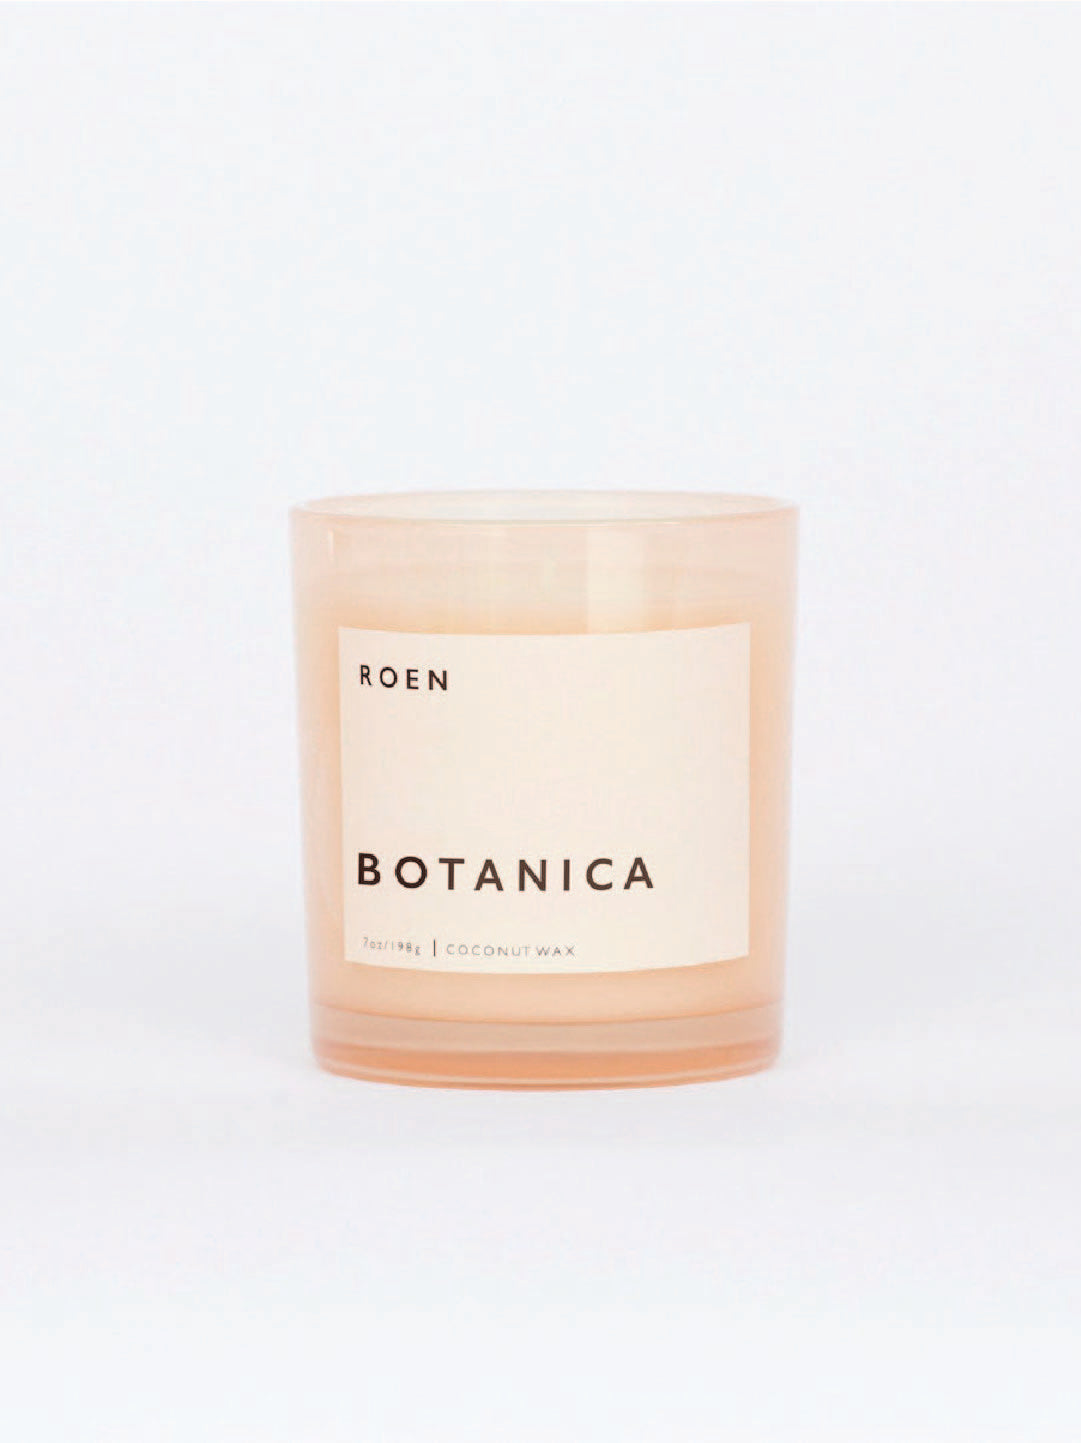 Botanica Candle by Roen